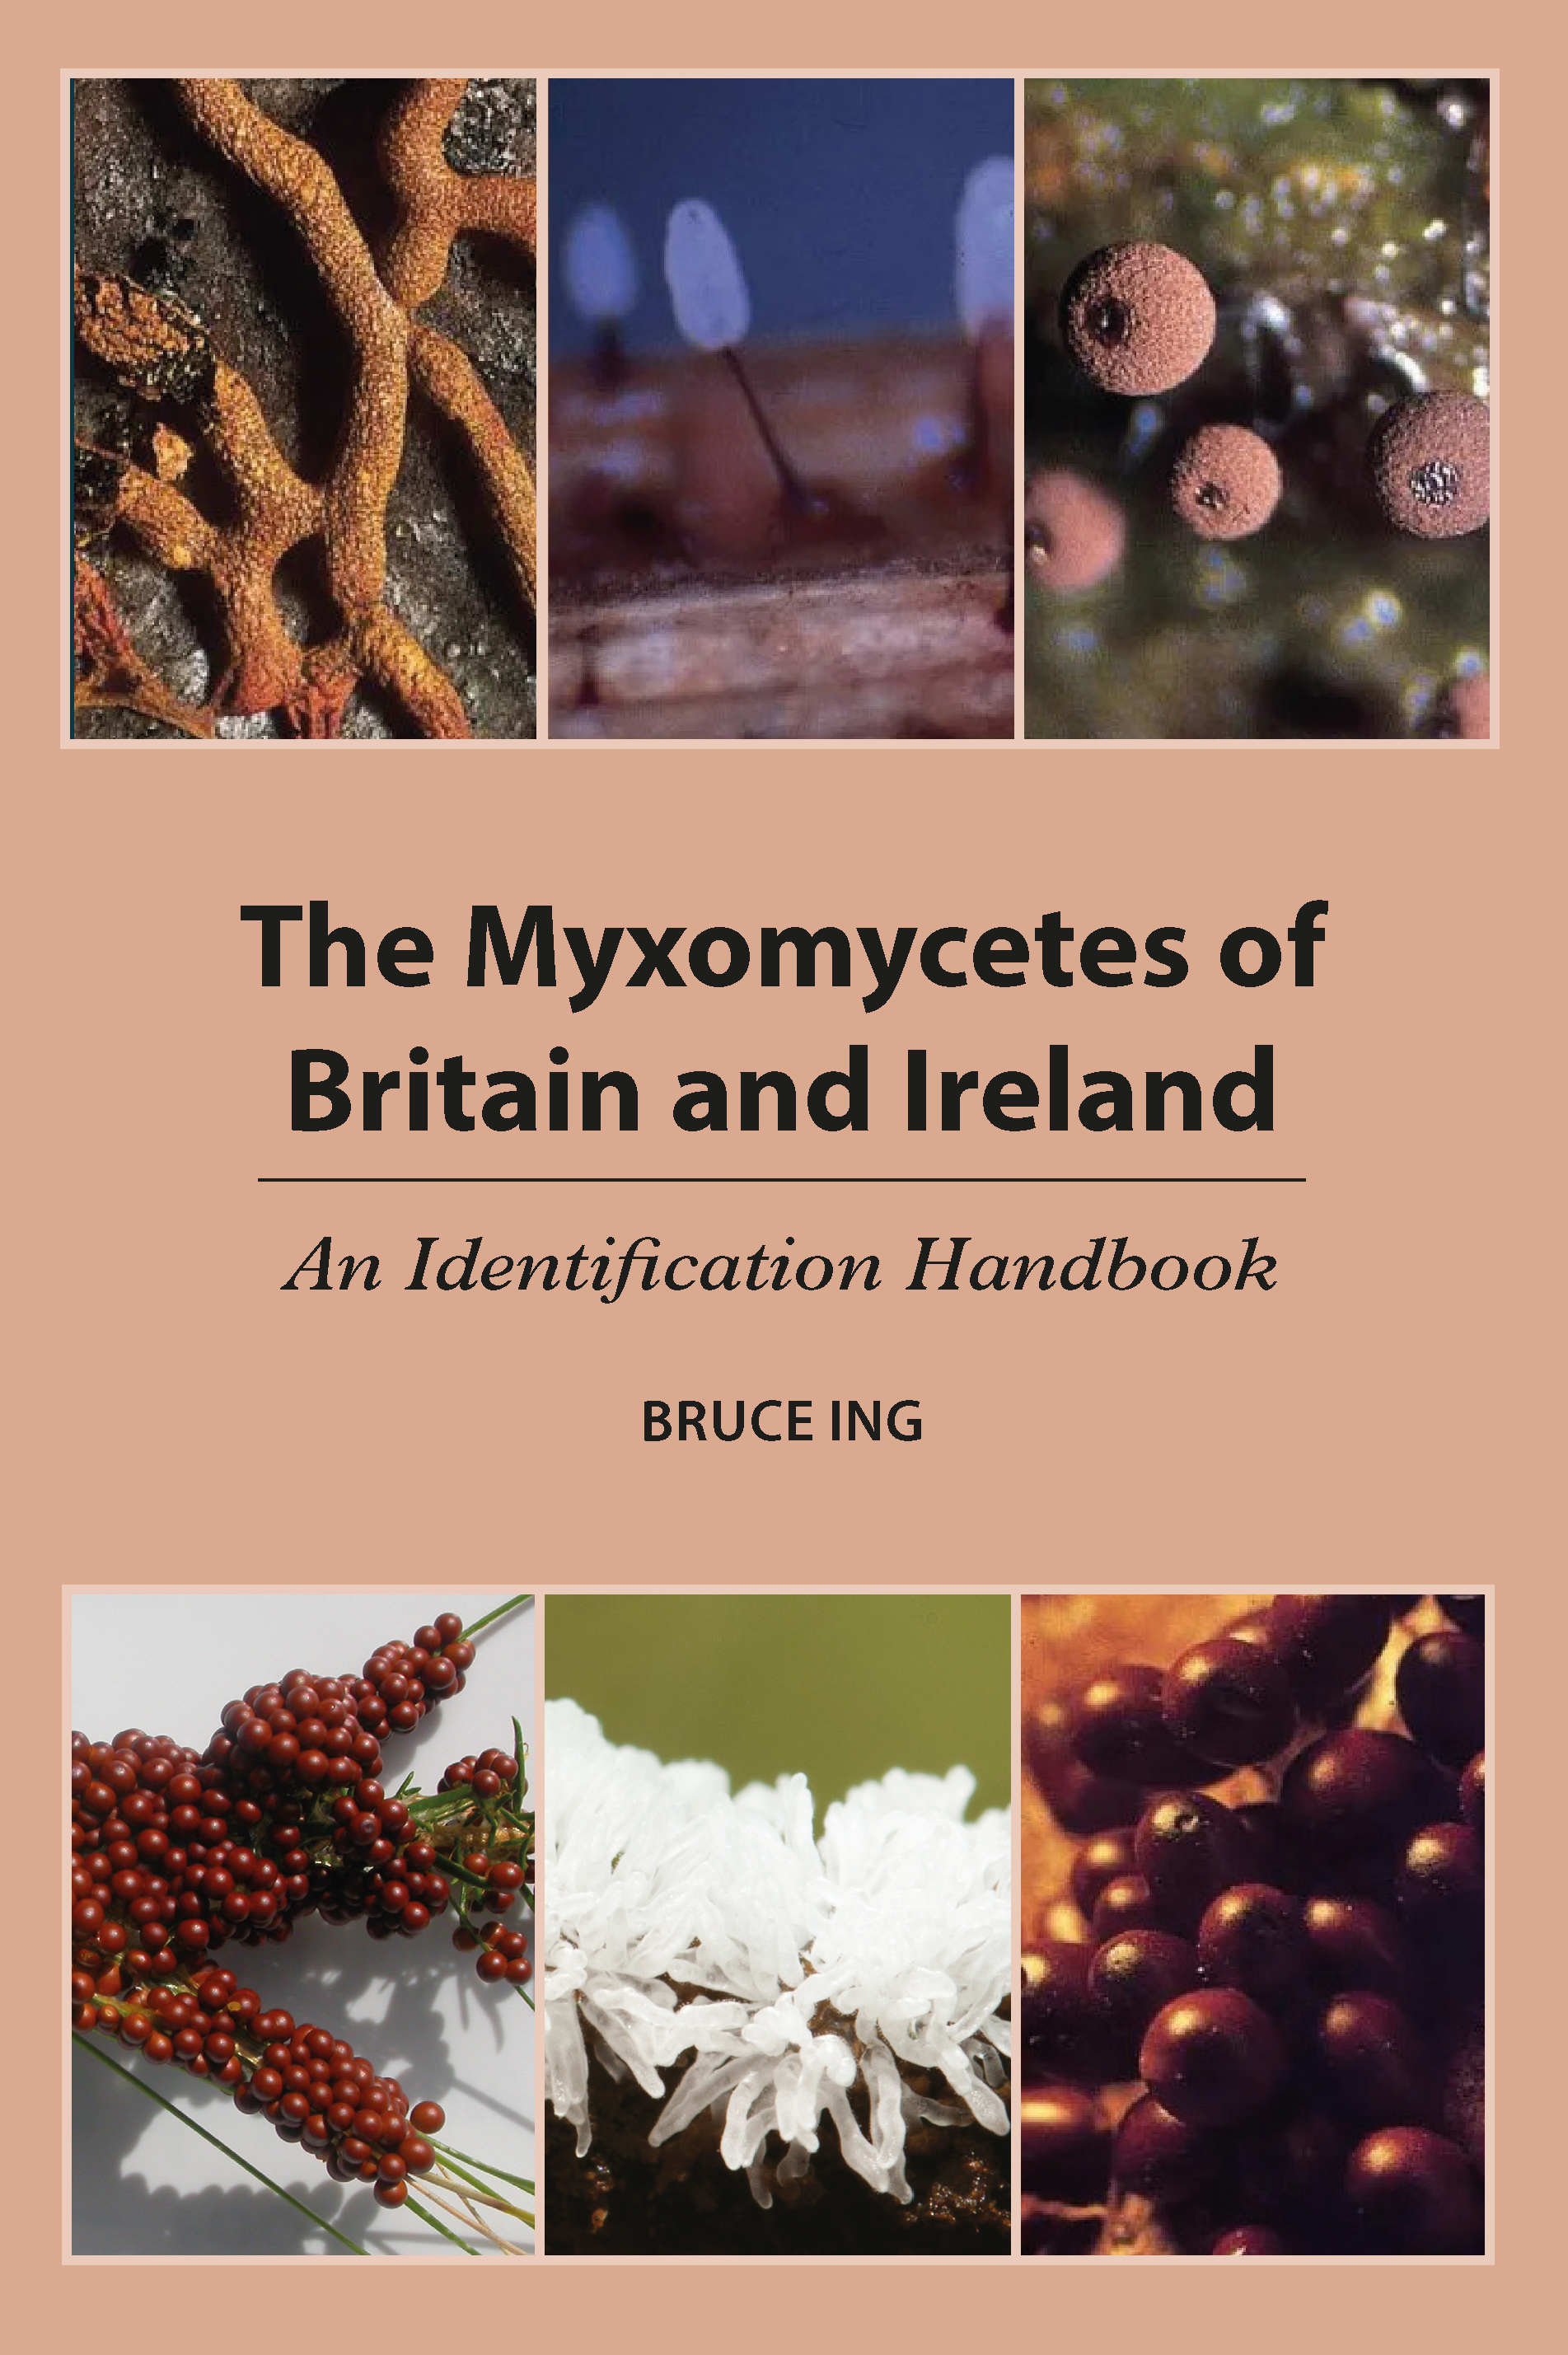 The Myxomycetes of Britain and Ireland: An Identification Handbook